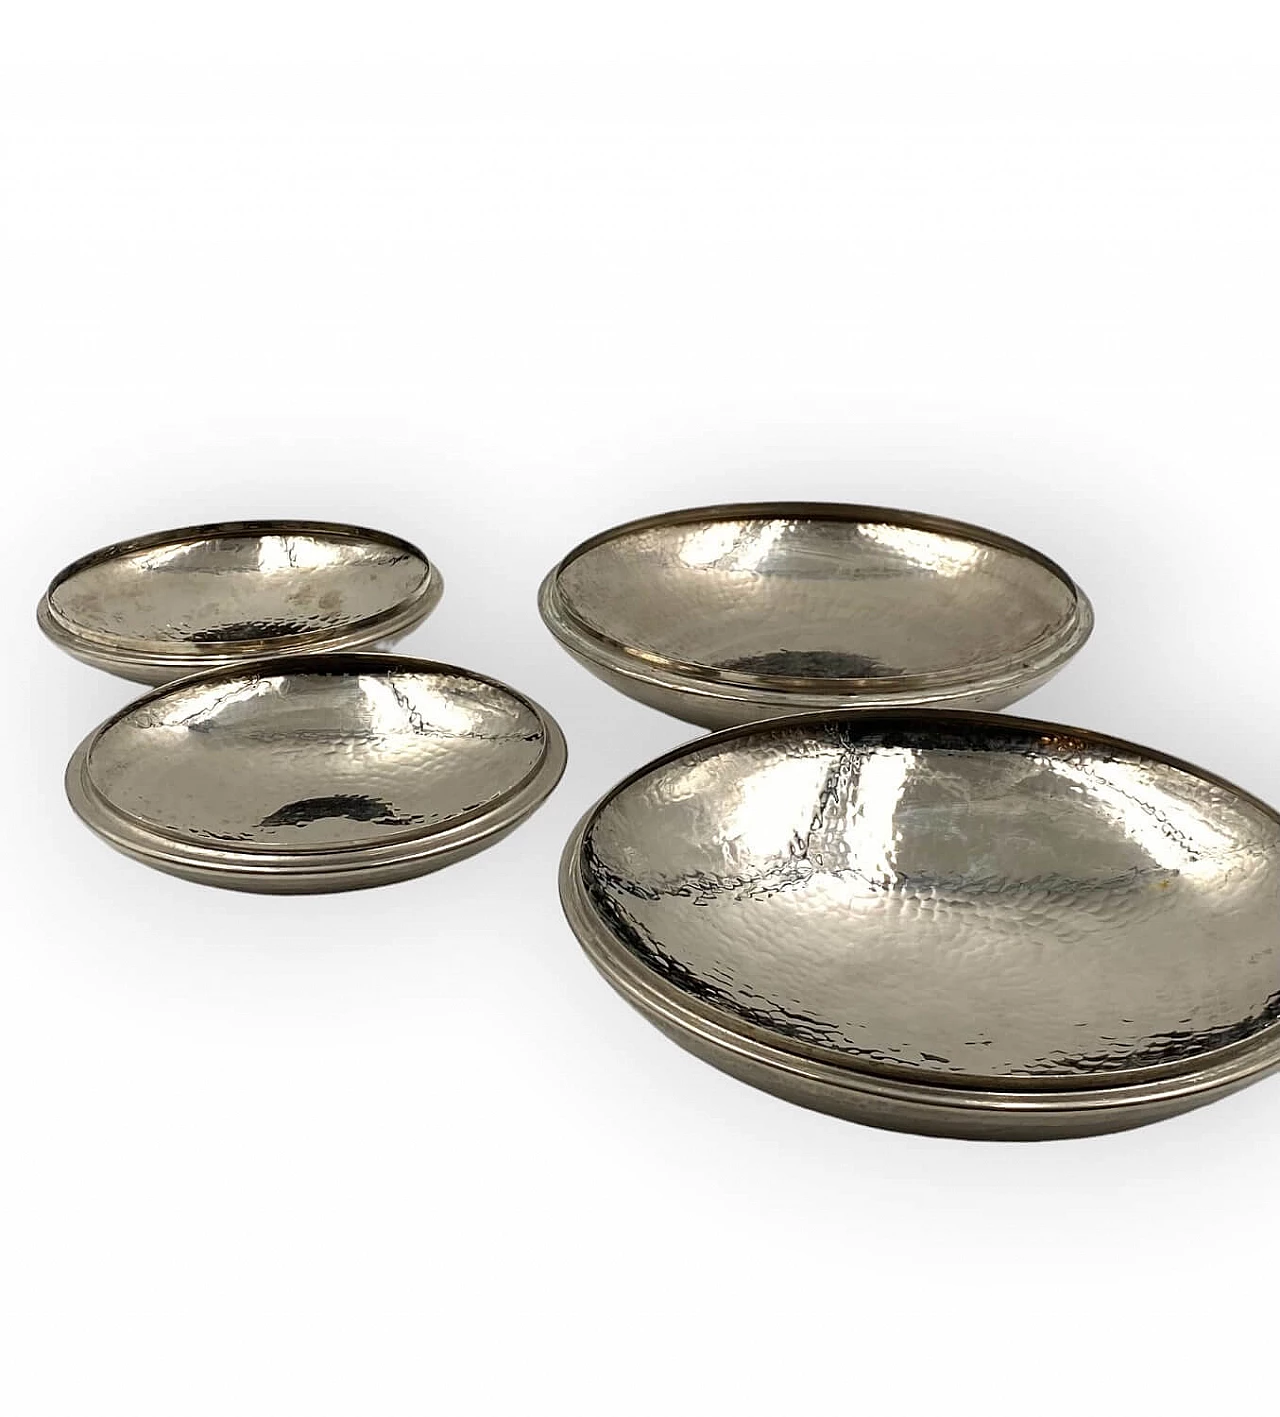 Pair of silver plated object holder by Marino Marini for Laras, 1970s 22